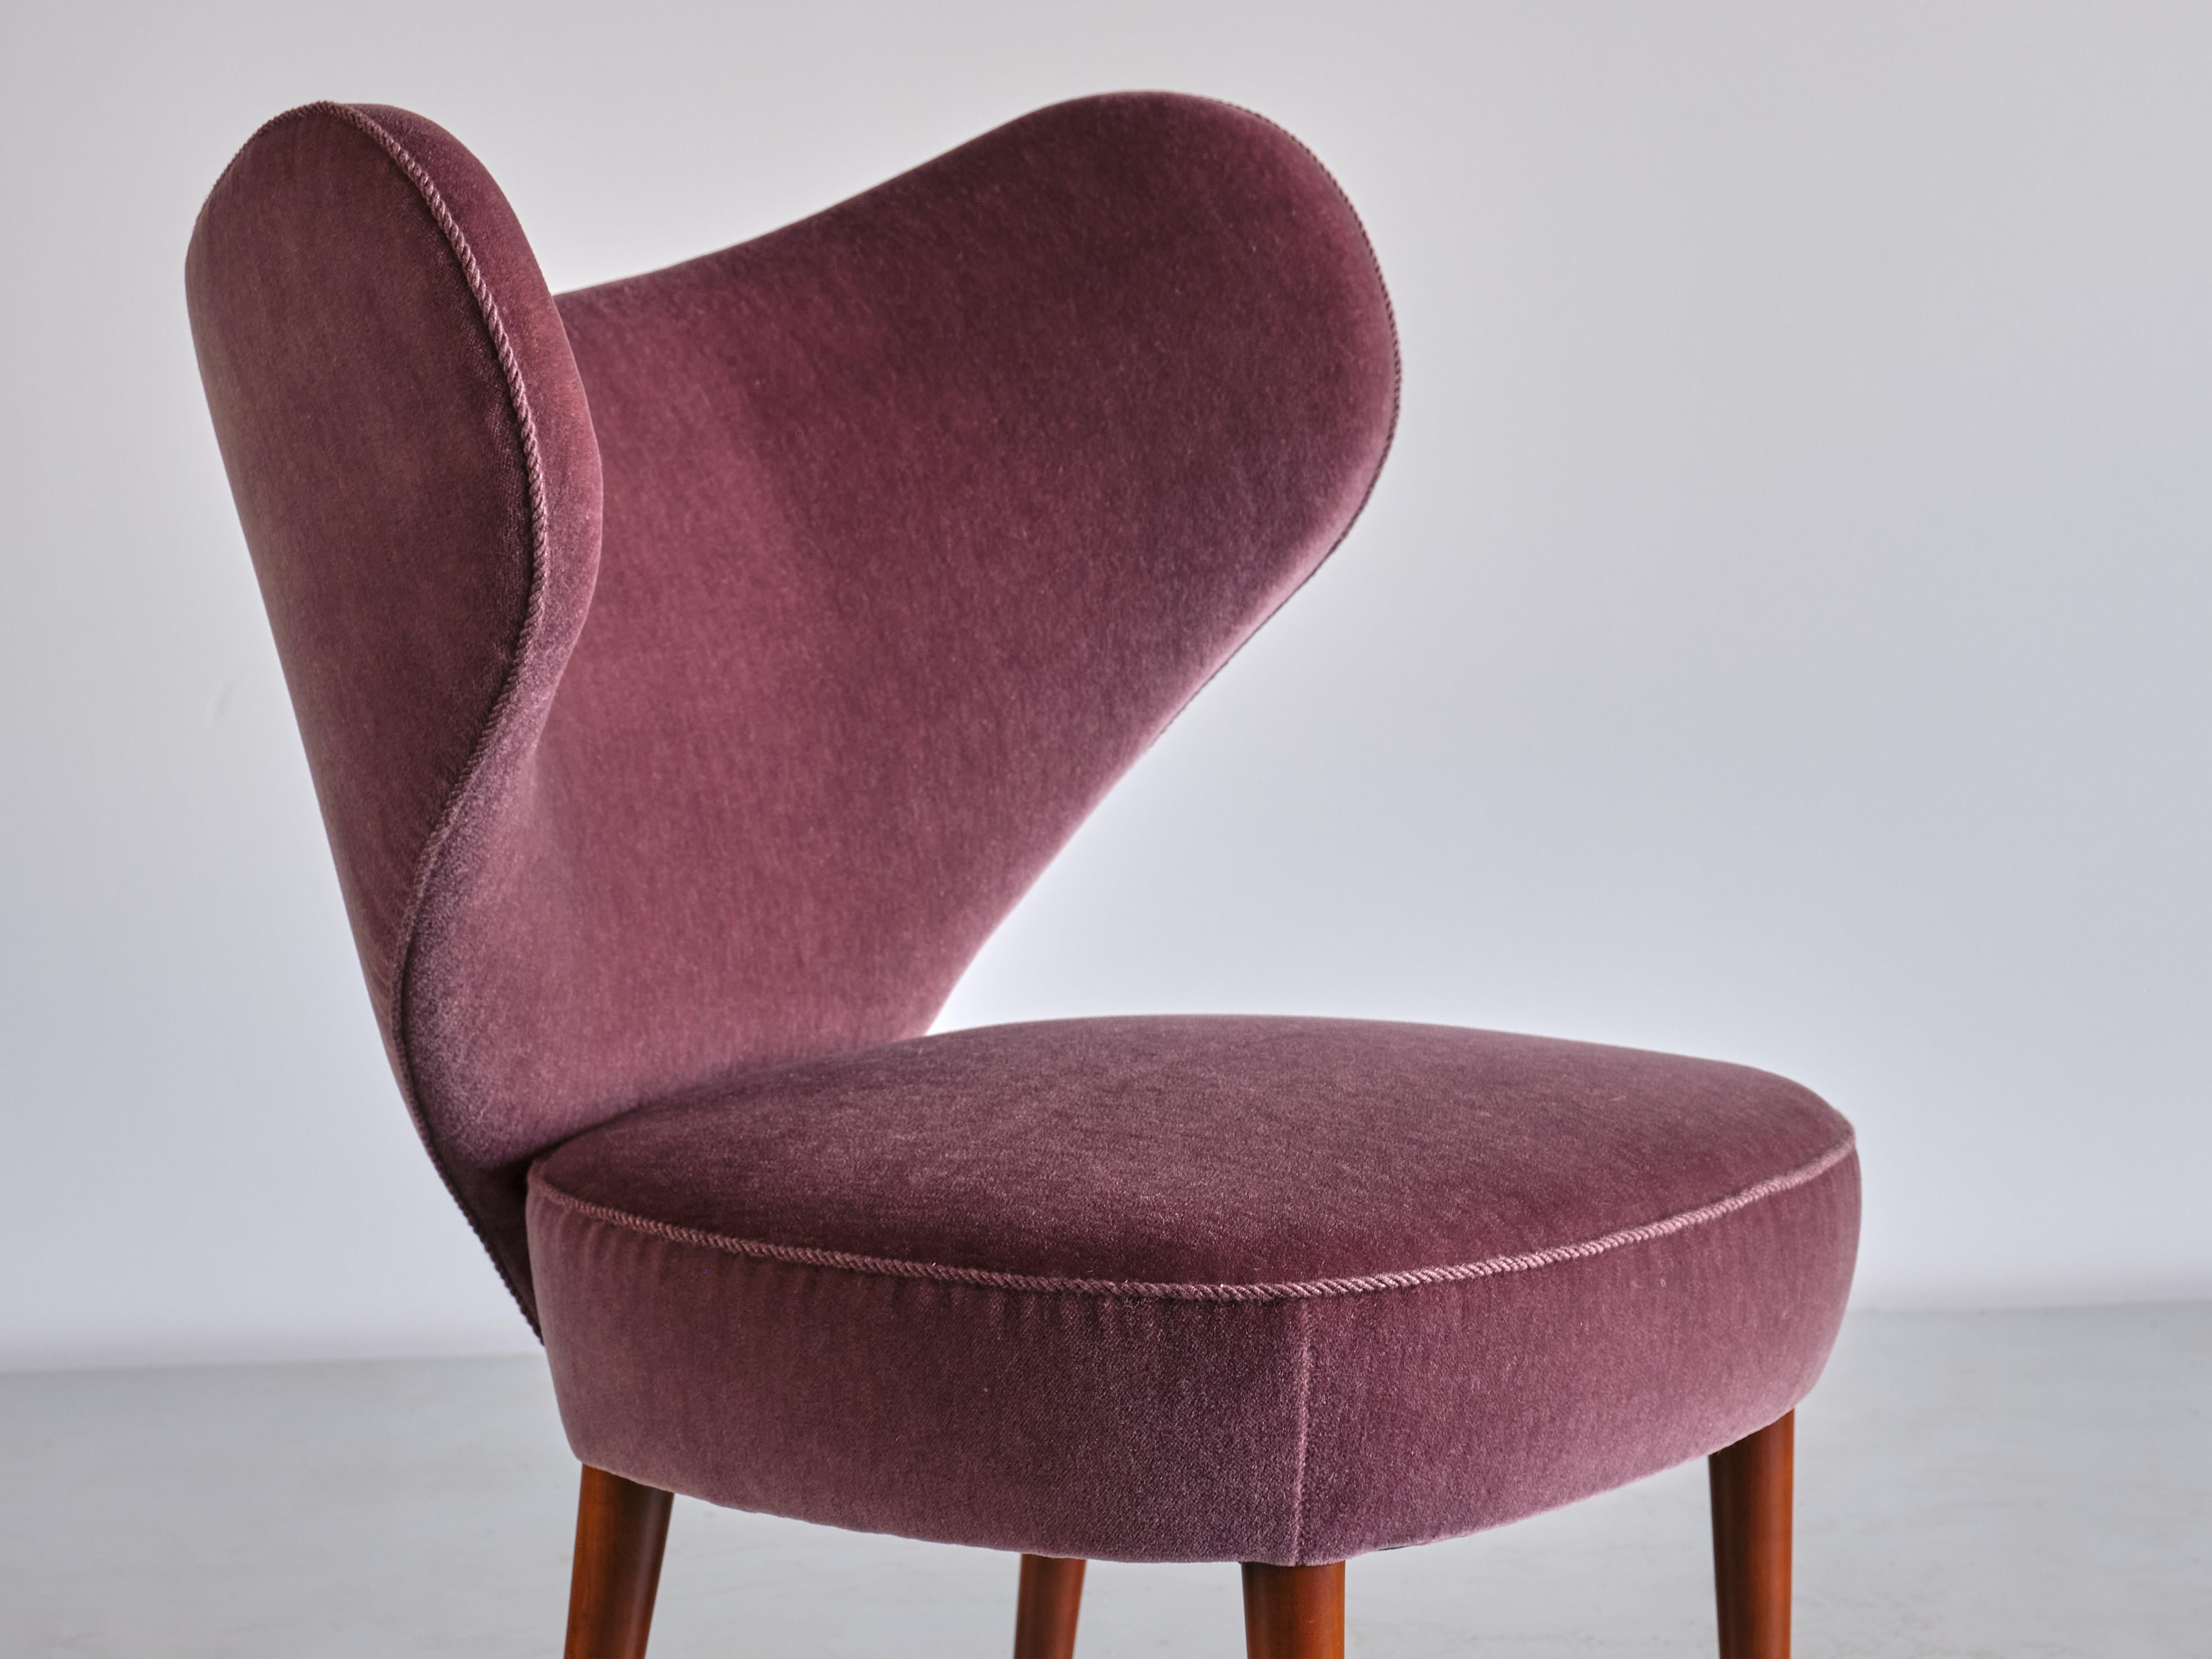 Exceptional 'Heart' Chair in Purple Mohair, Brøndbyøster Møbel, Denmark, 1953 In Good Condition For Sale In The Hague, NL